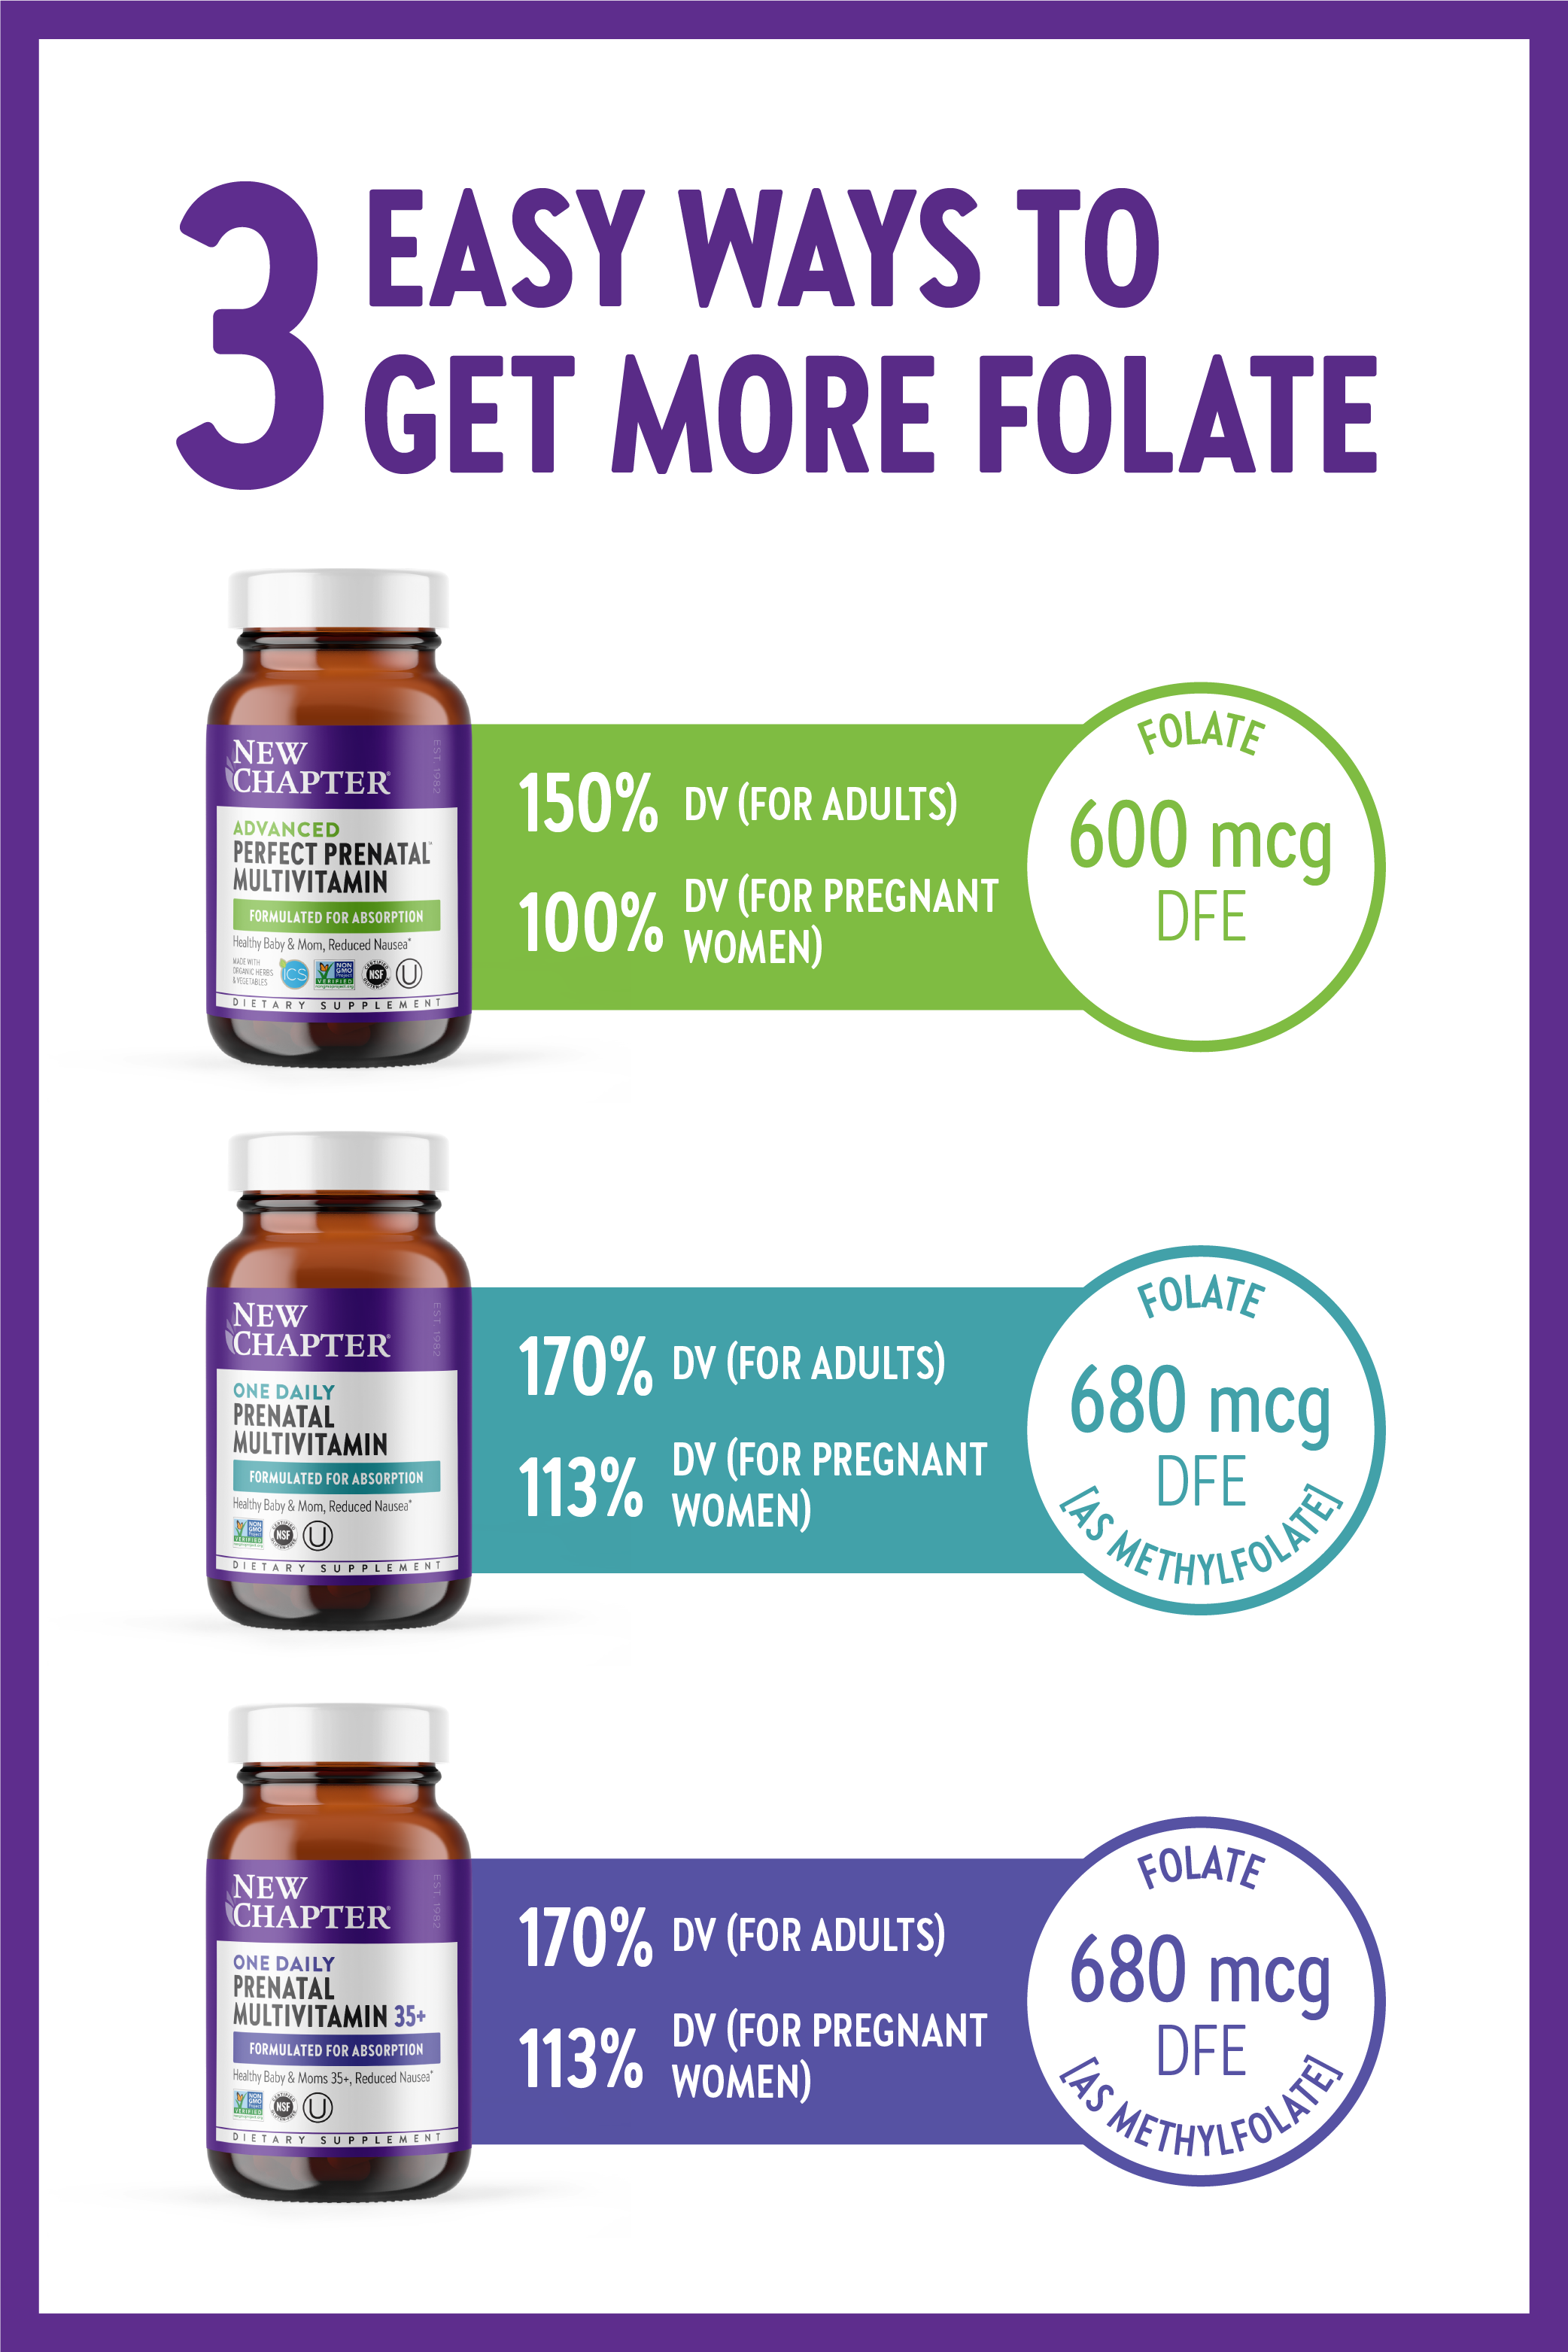 3 easy ways to get more folate